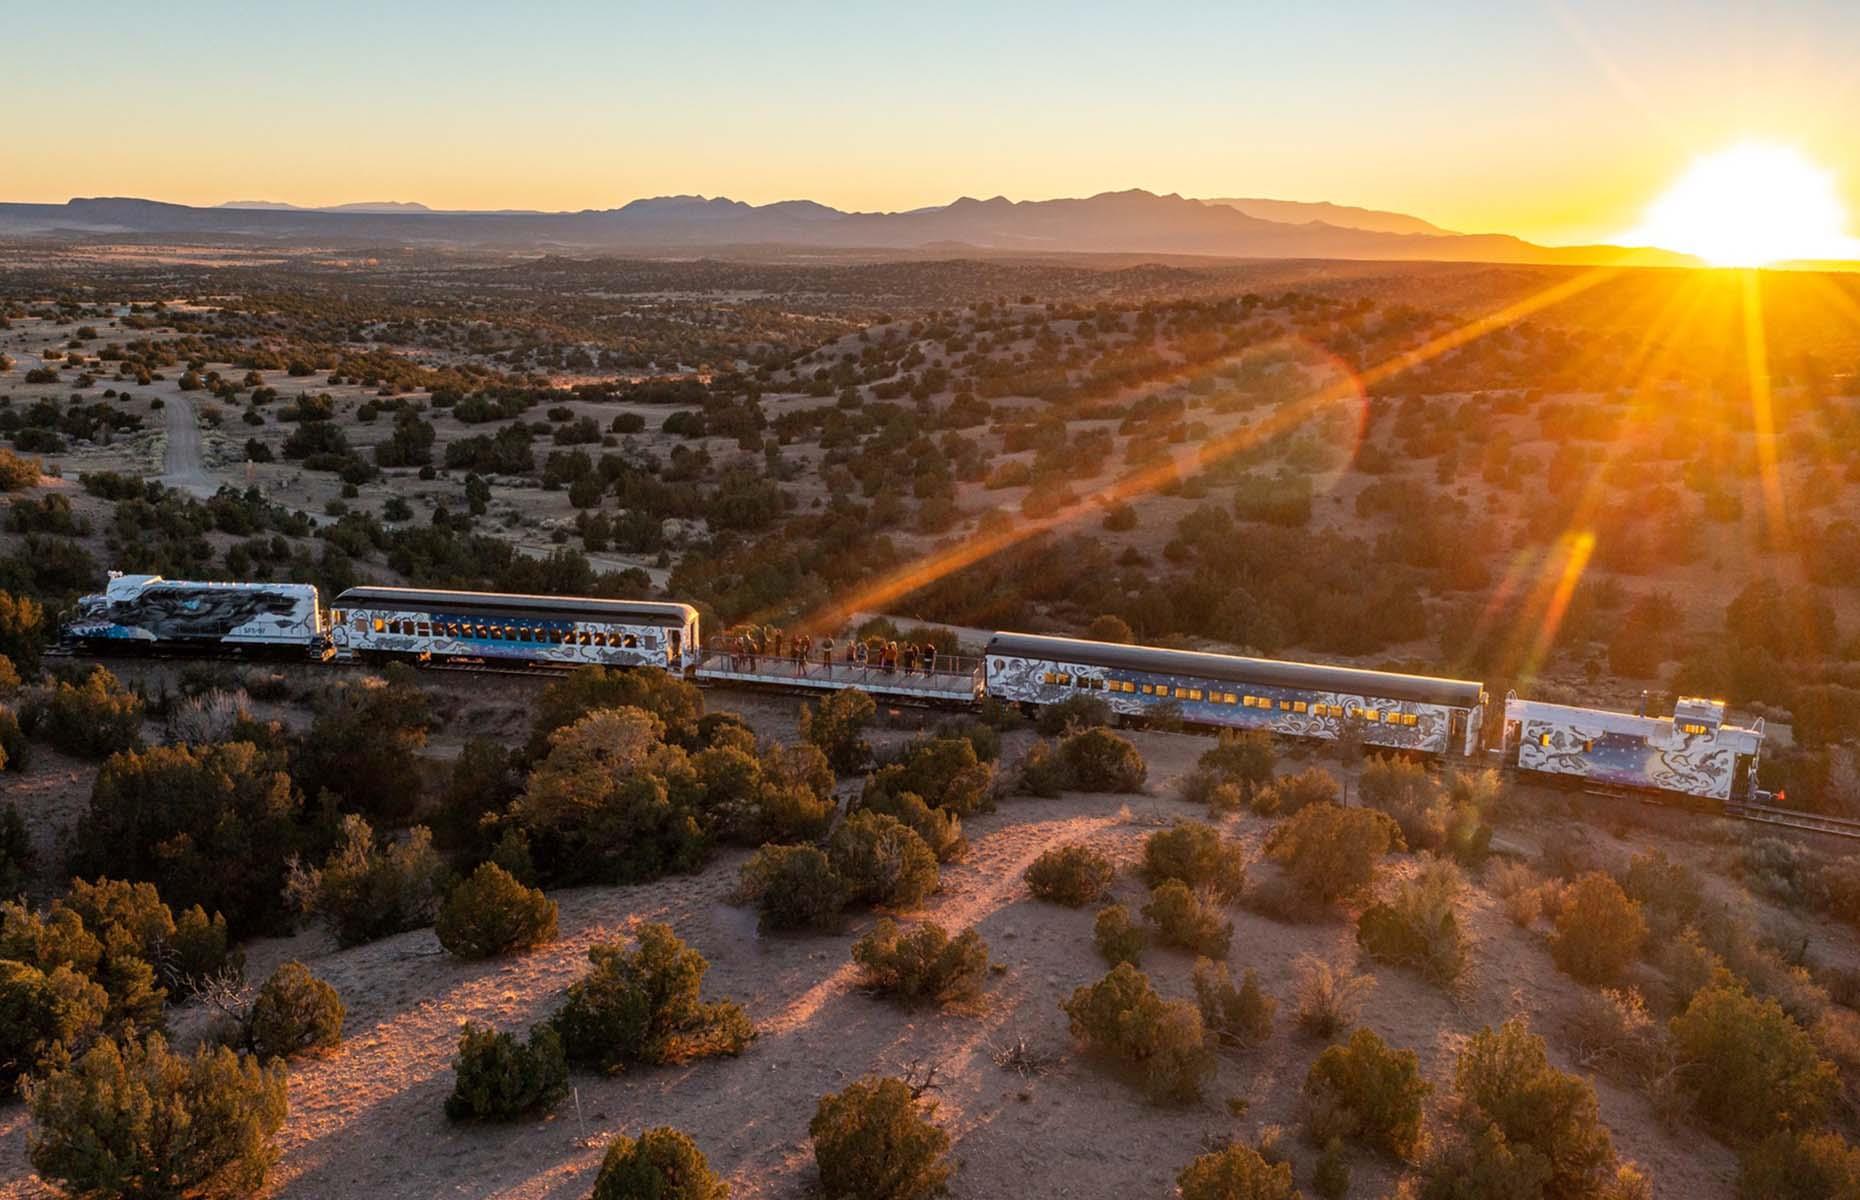 <p>Passengers on New Mexico’s Sky Railway are walking in the footsteps of Hollywood icons Judy Garland and Clark Gable by riding the heritage line. For over 140 years, these tracks have swept travelers across the amber and olive-green landscapes between Santa Fe and Lamy.</p>  <p>There are a few different ways to enjoy the round-trip journey – the Stargazer experience unlocks the mysteries of the night sky above the Galisteo Basin, while the Sunset Serenade sets the coming of dusk to a soundtrack of live music.</p>